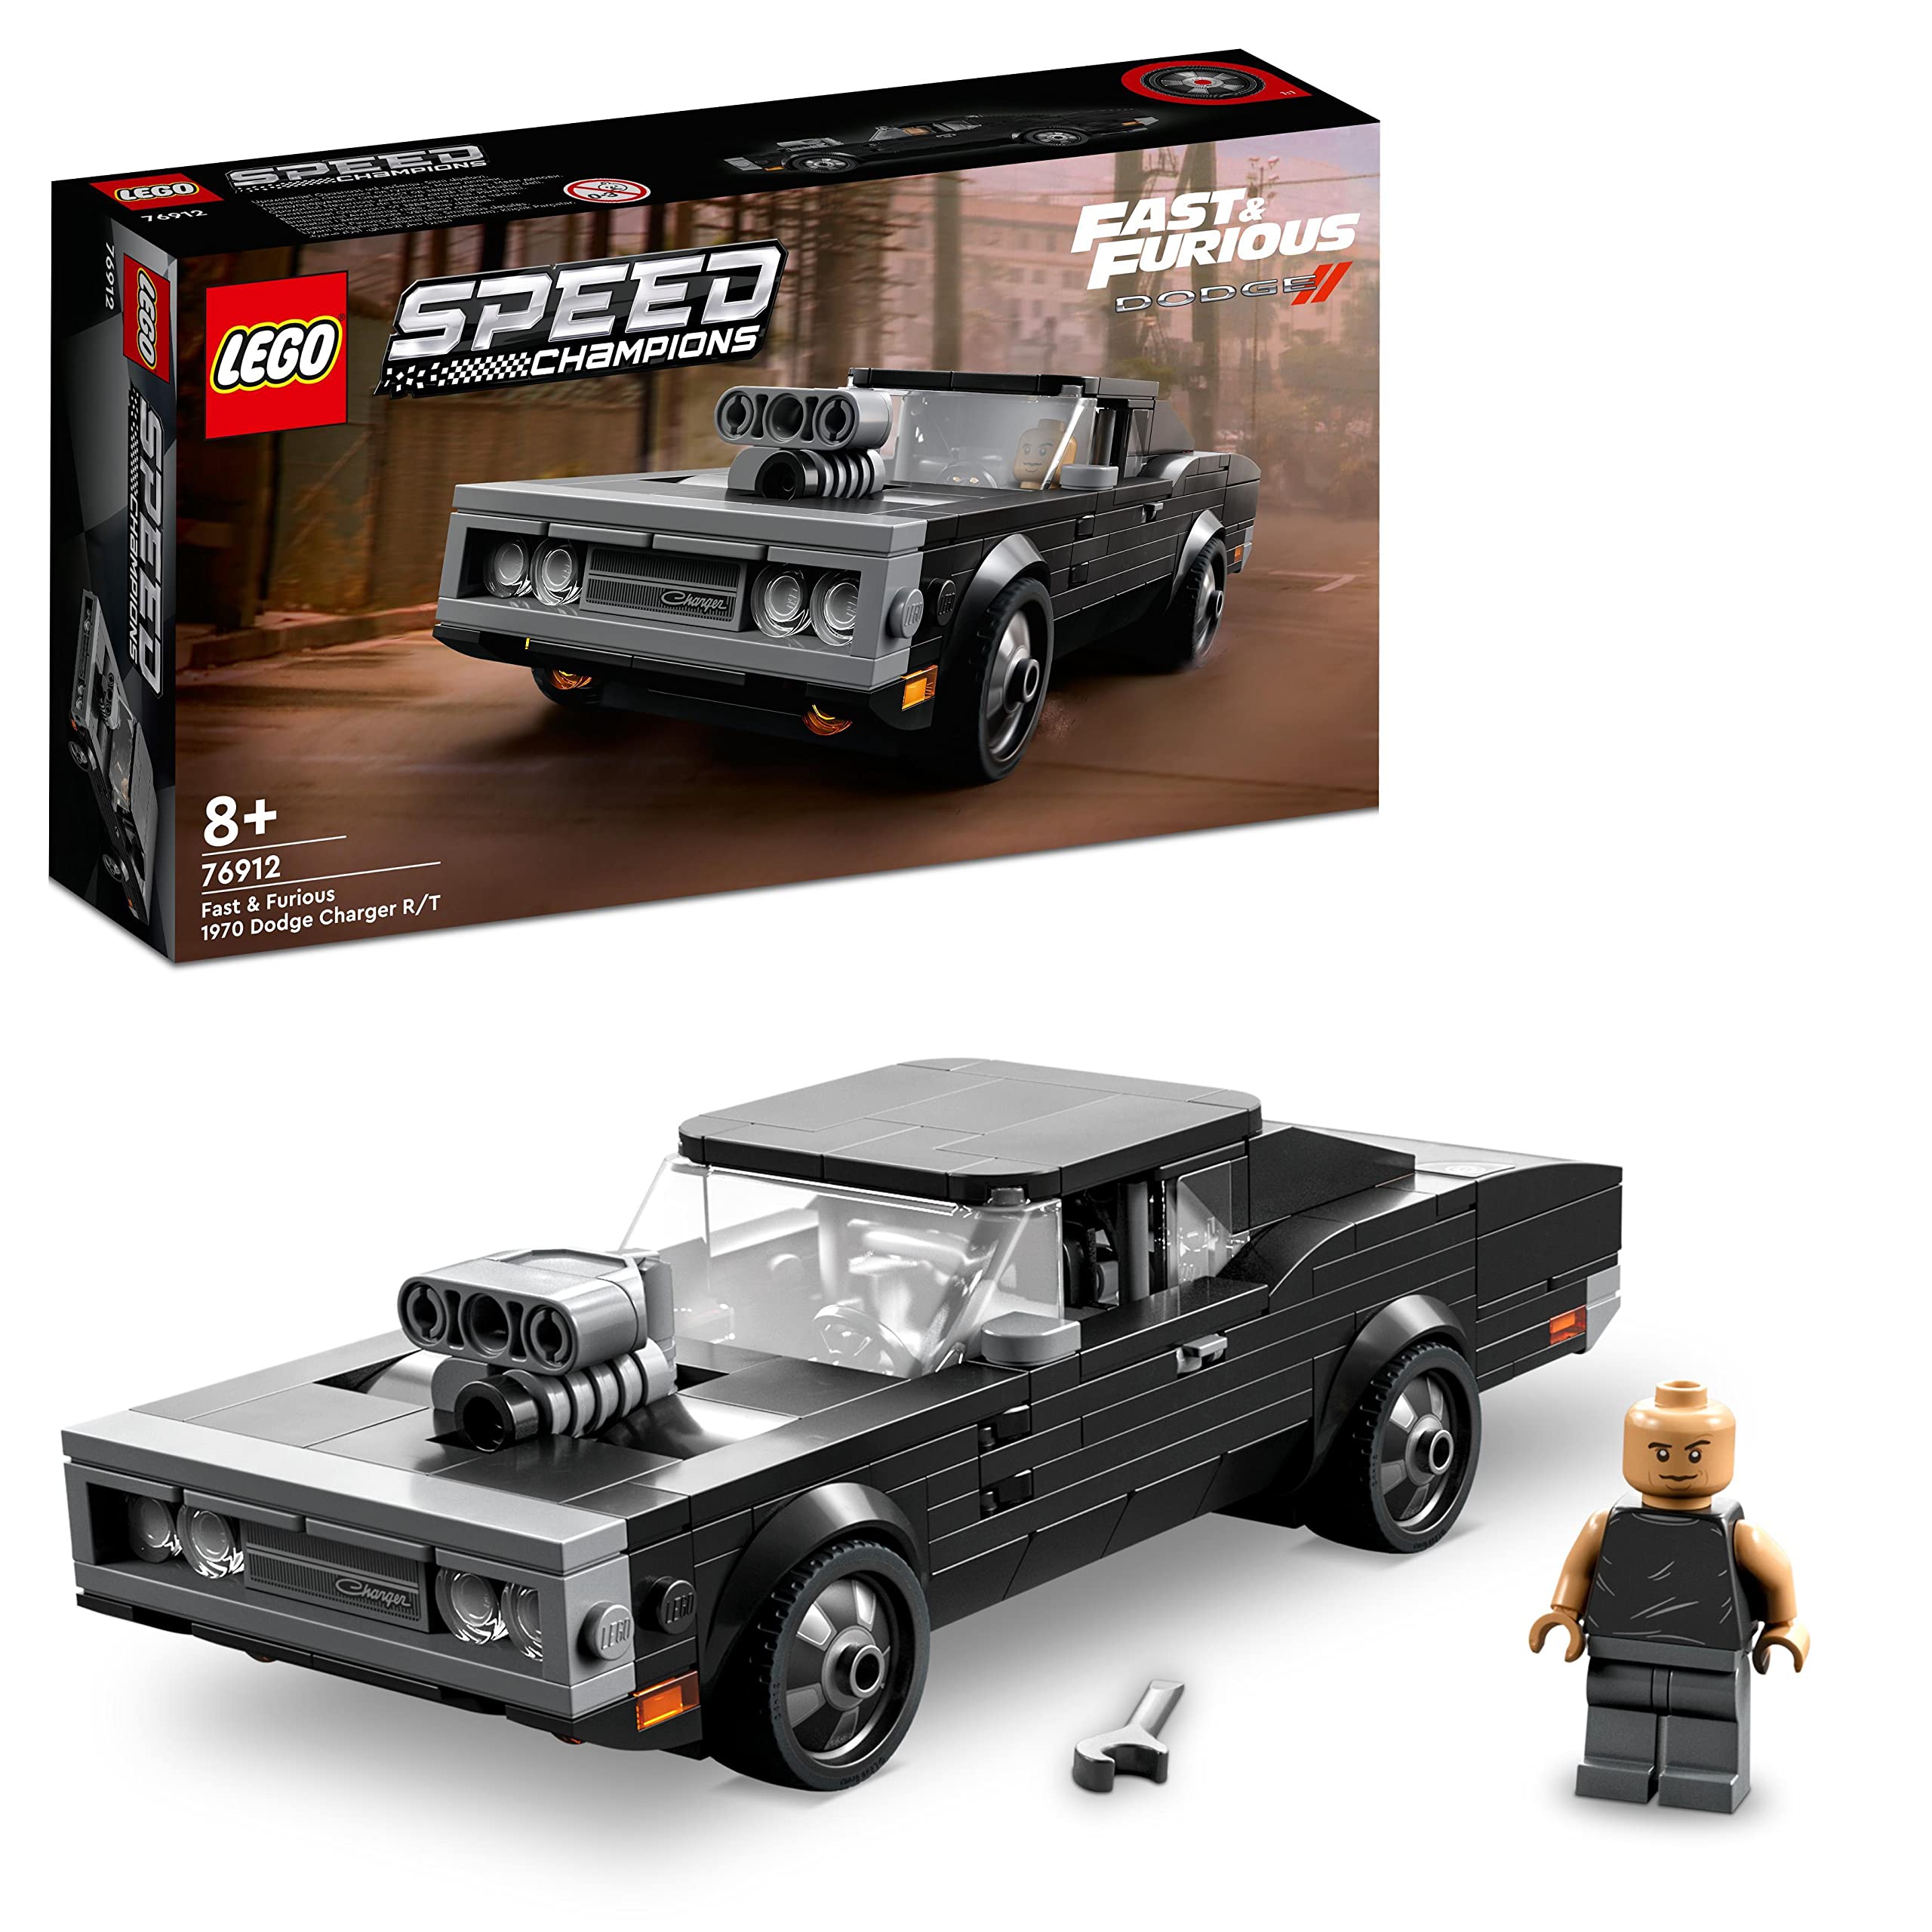 Mua LEGO 76912 Speed Champions Fast & Furious 1970 Dodge Charger R/T, Toy  Car Model for Building for Children, Set with Dominic Toretto Mini Figure  trên Amazon Đức chính hãng 2023 | Giaonhan247